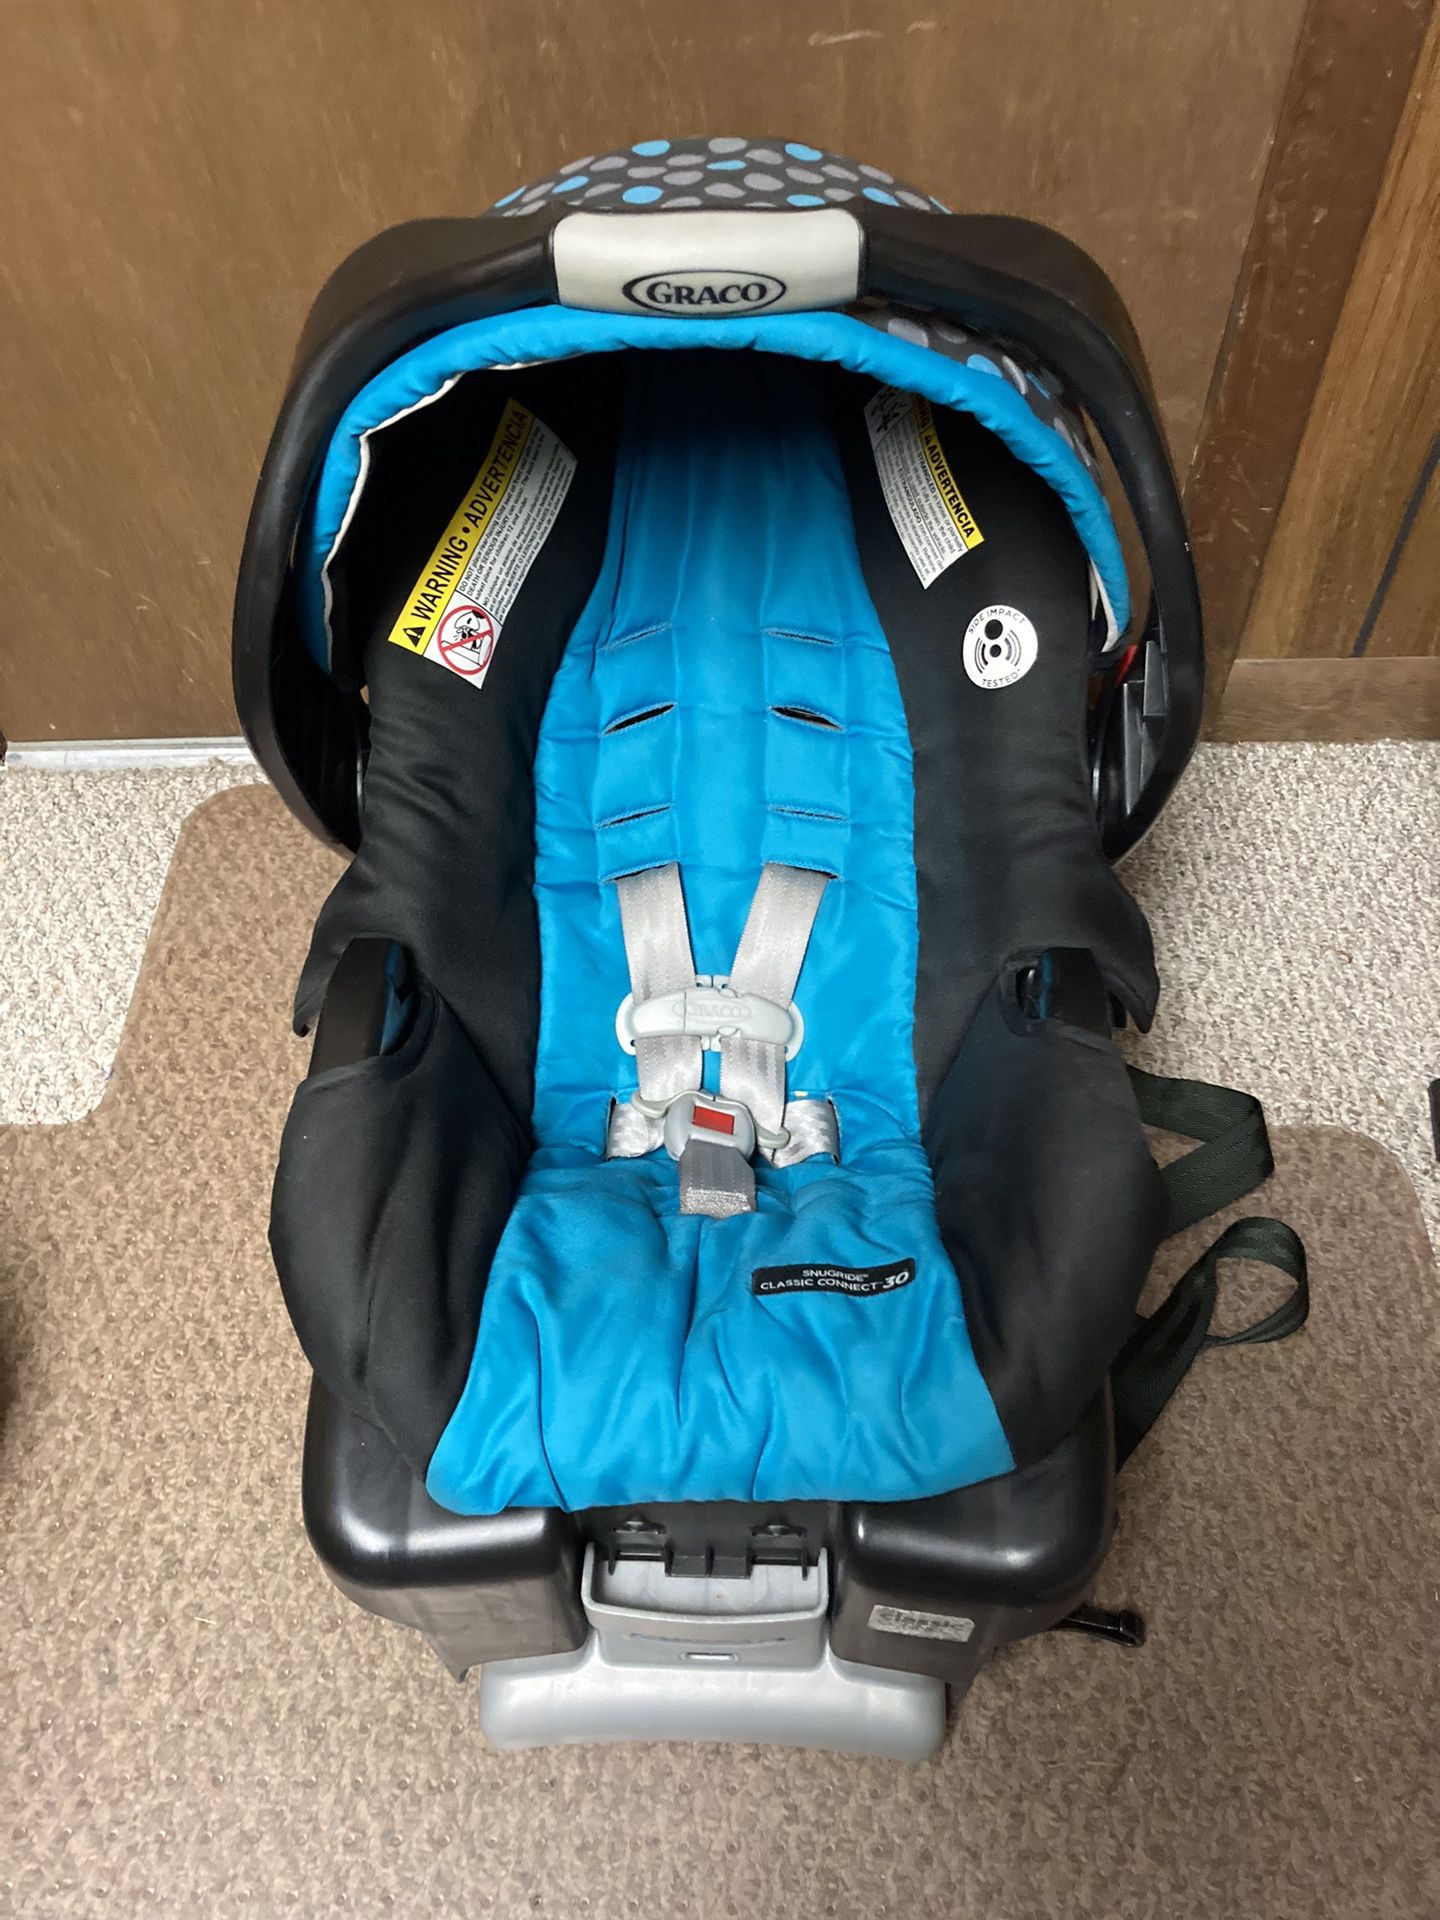 Graco Baby Car Seat And Carrier